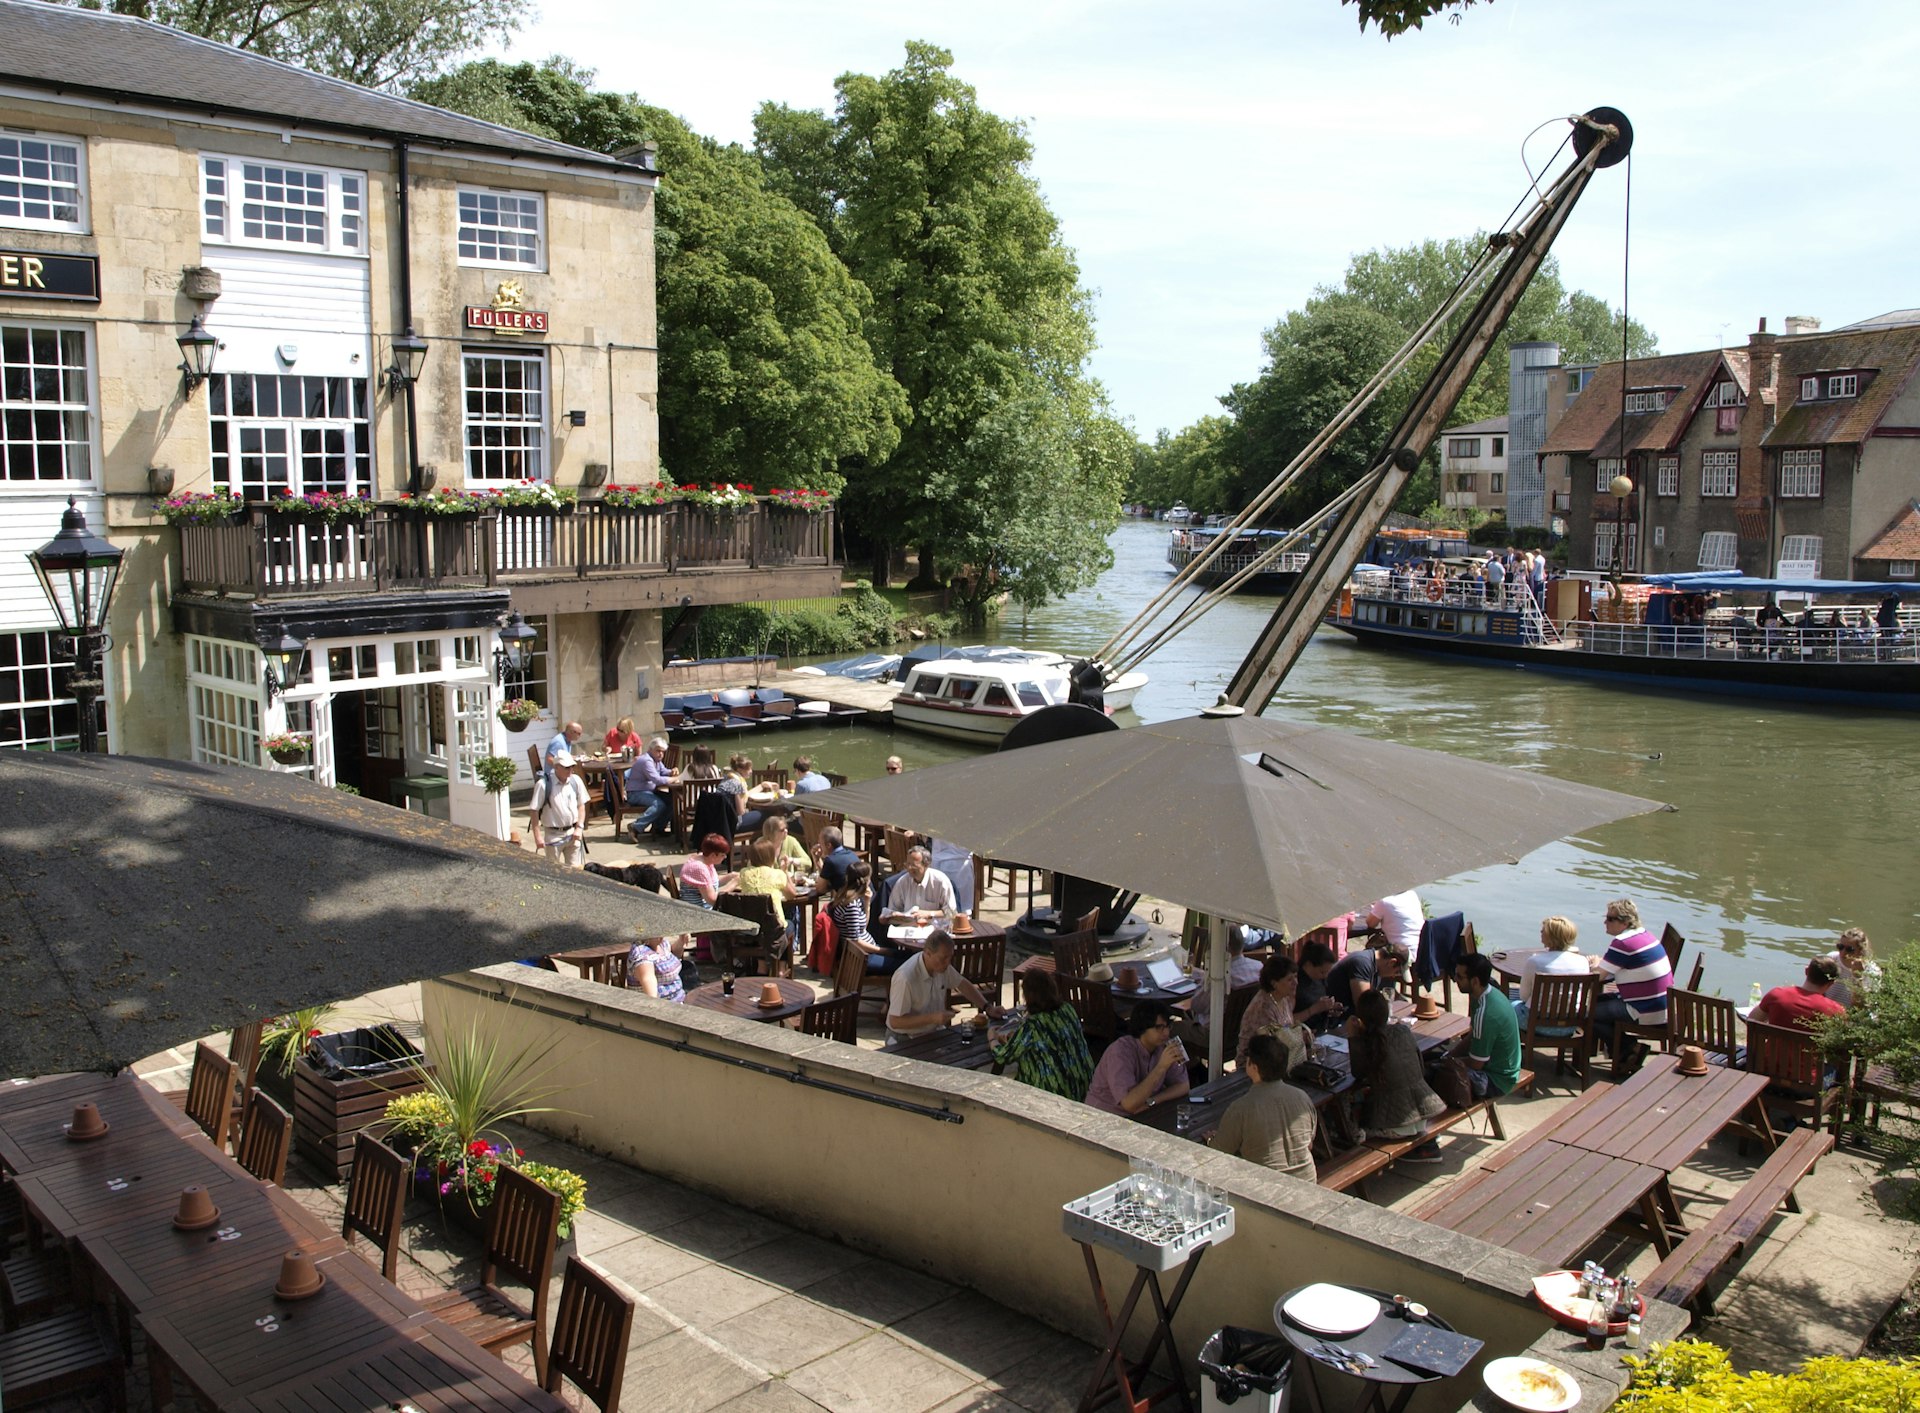 The Head of the River Pub, Oxford. The river-side pub has a beer garden that is full of people drinking and socialising.